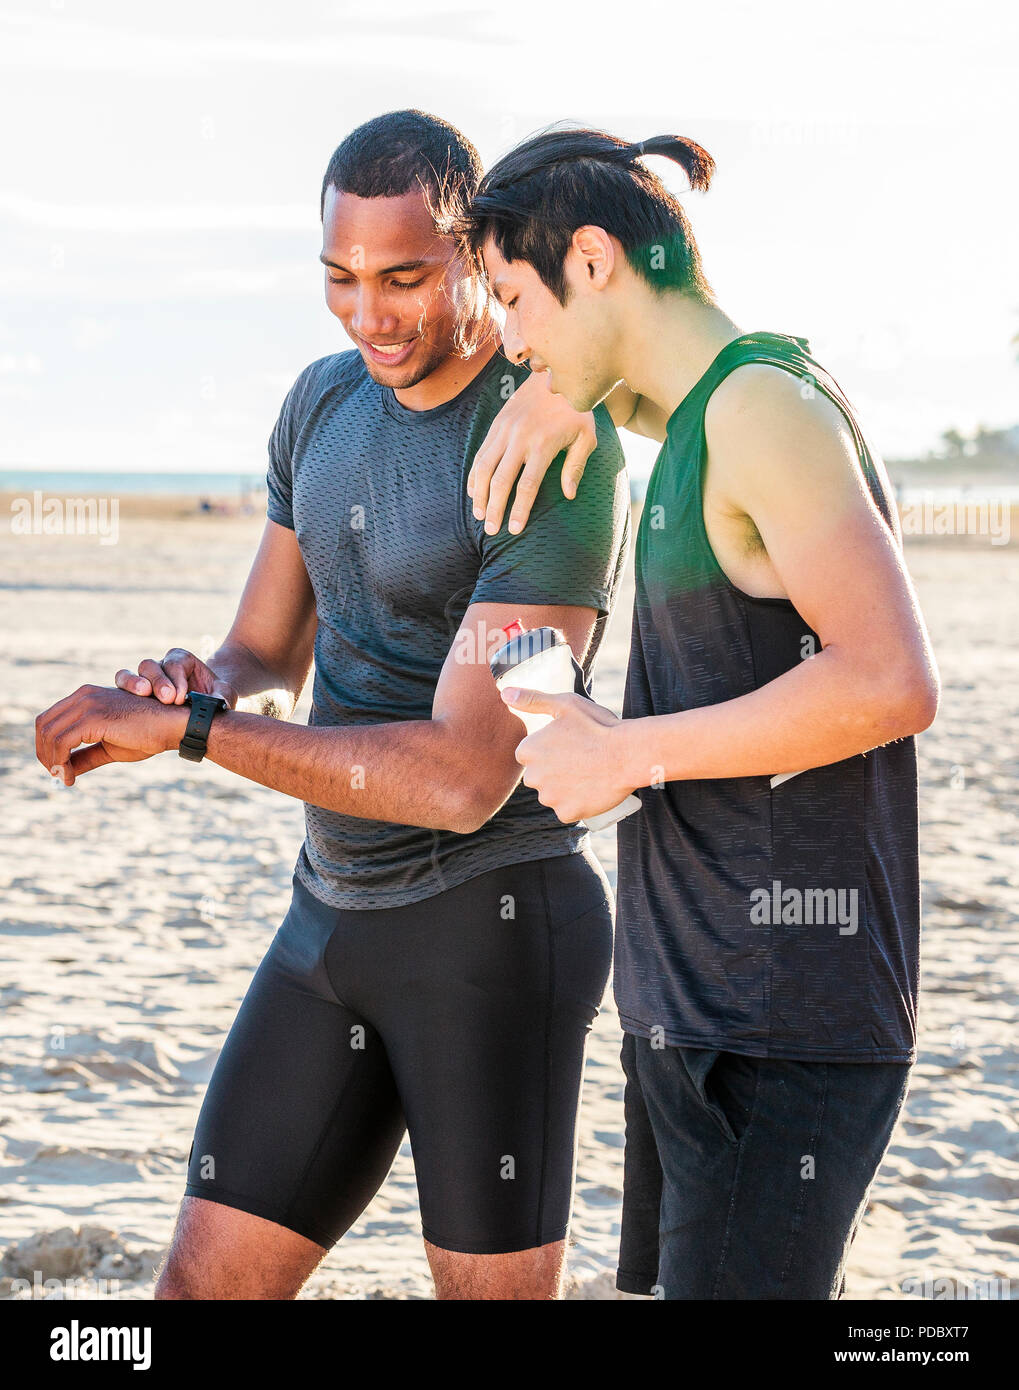 Male runners resting, checking smart watch fitness tracker on sunny beach Stock Photo